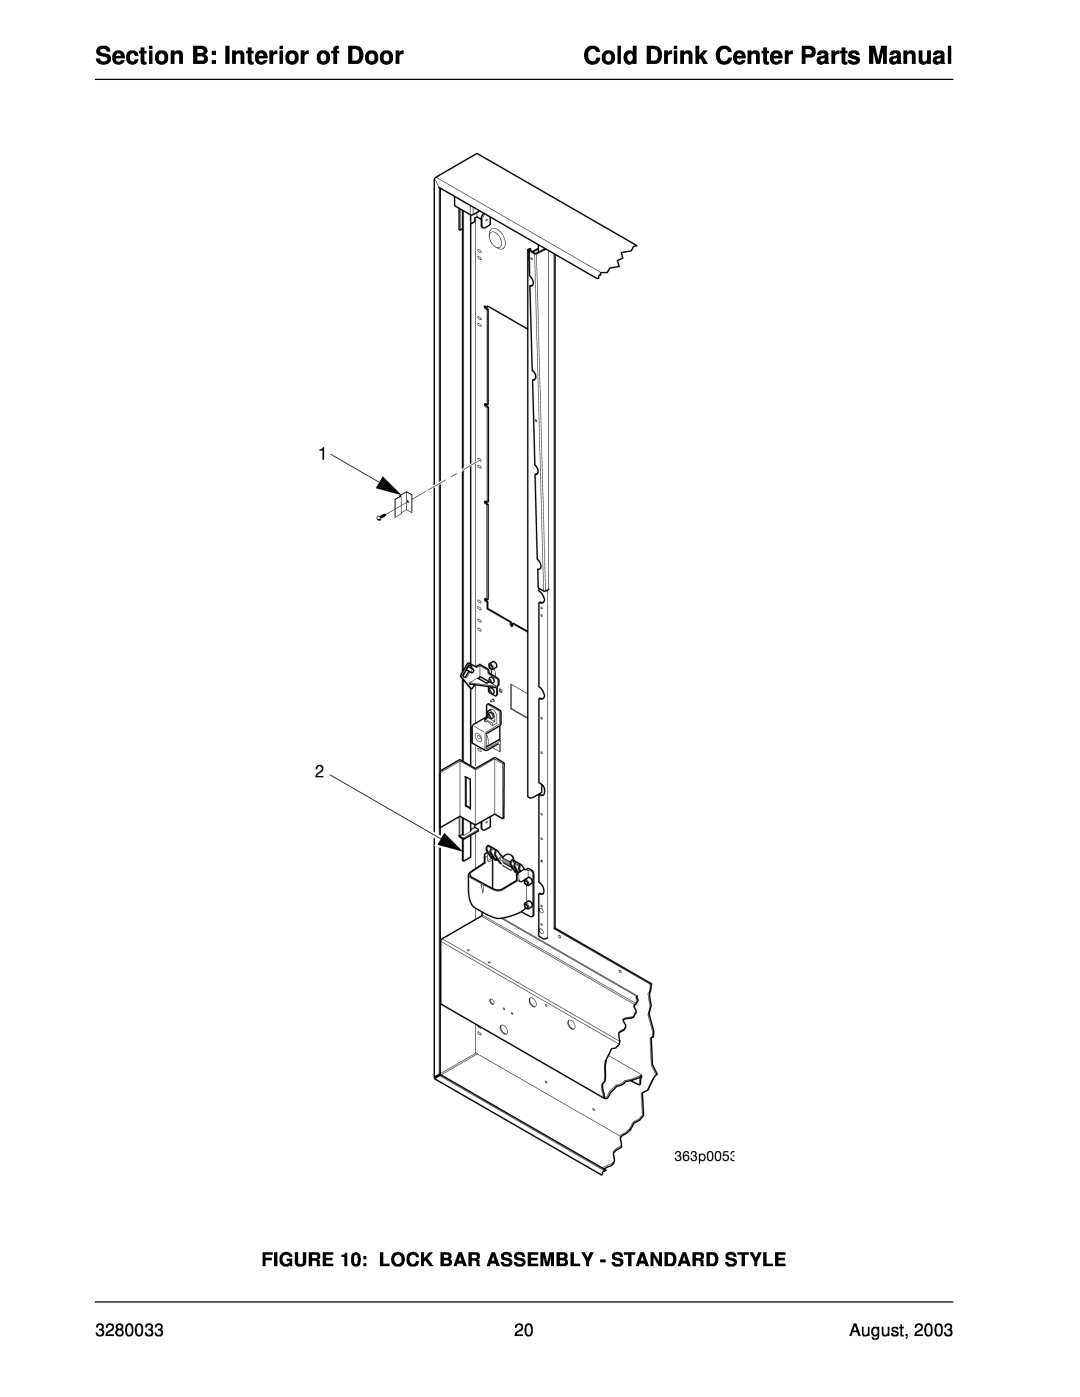 Crane Merchandising Systems 328, 327 manual Section B Interior of Door, Cold Drink Center Parts Manual 